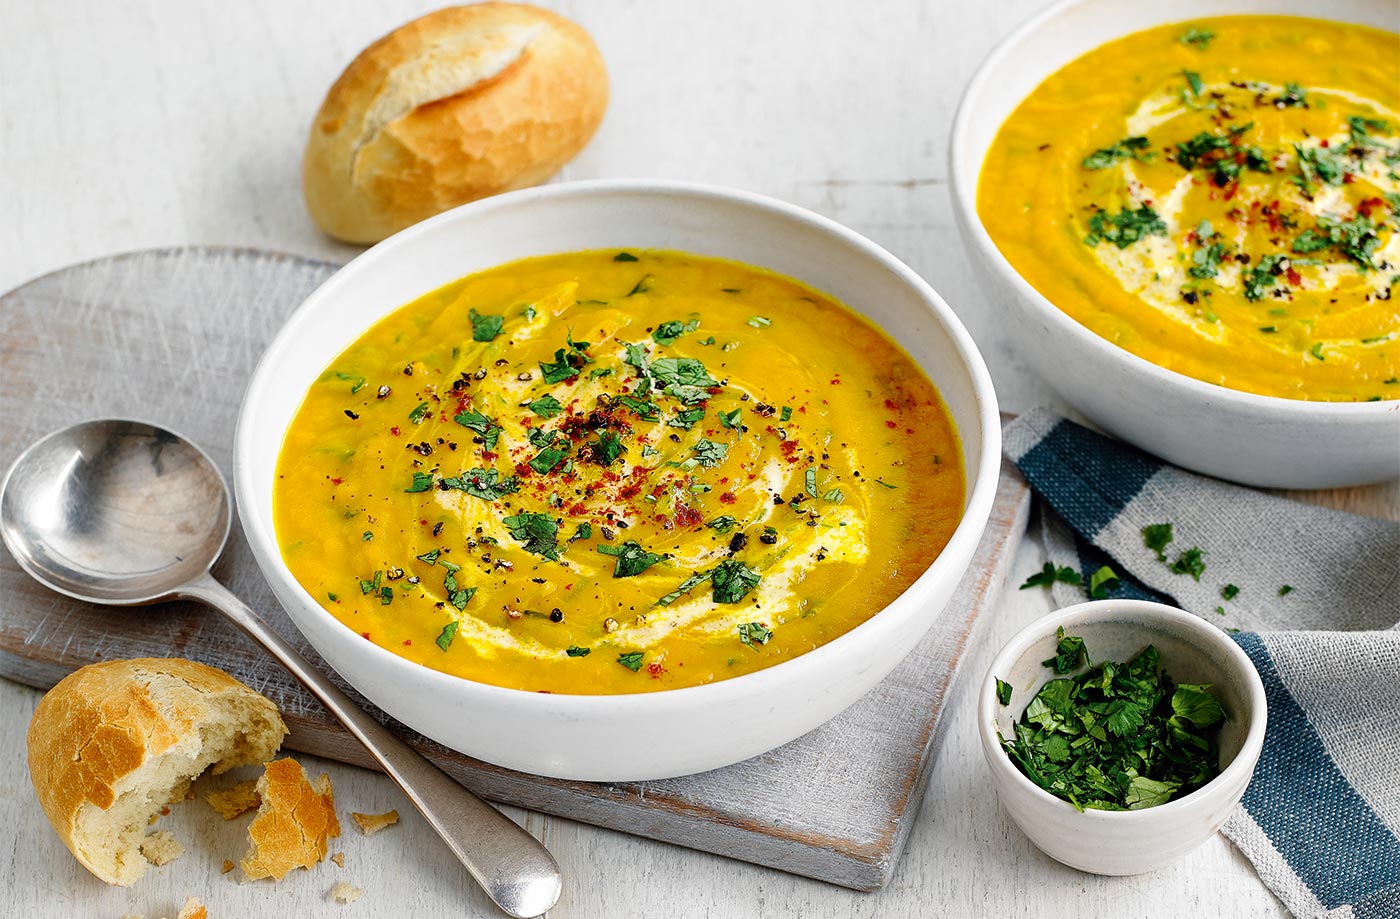 Settle These Food Debates and We’ll Guess Which Three Foods You Love the Most soup